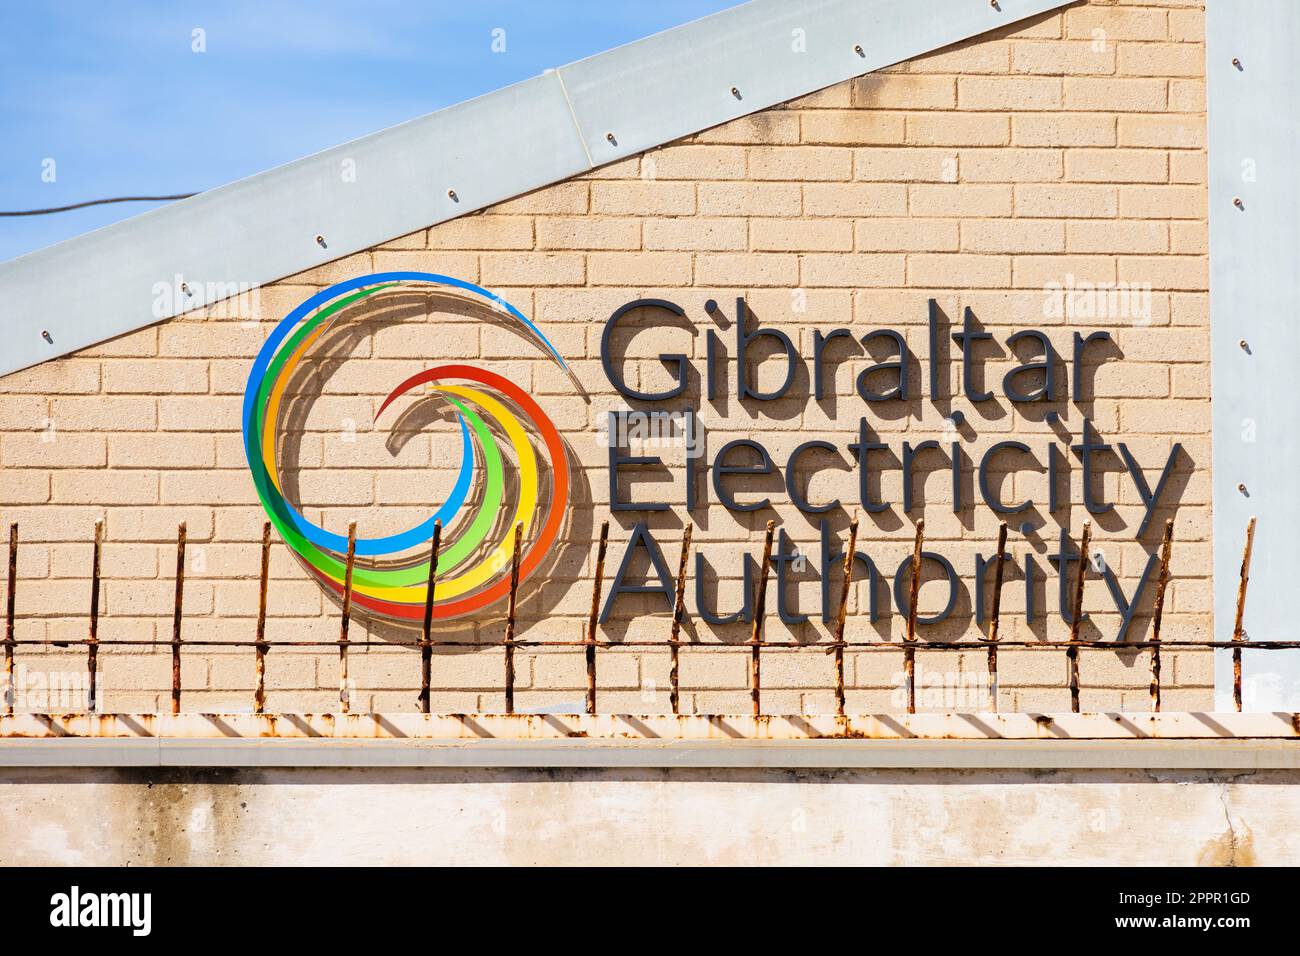 Gibraltar Electricity Authority logo on building. North Mole road, The British Overseas Territory of Gibraltar, the Rock of Gibraltar on the Iberian P Stock Photo